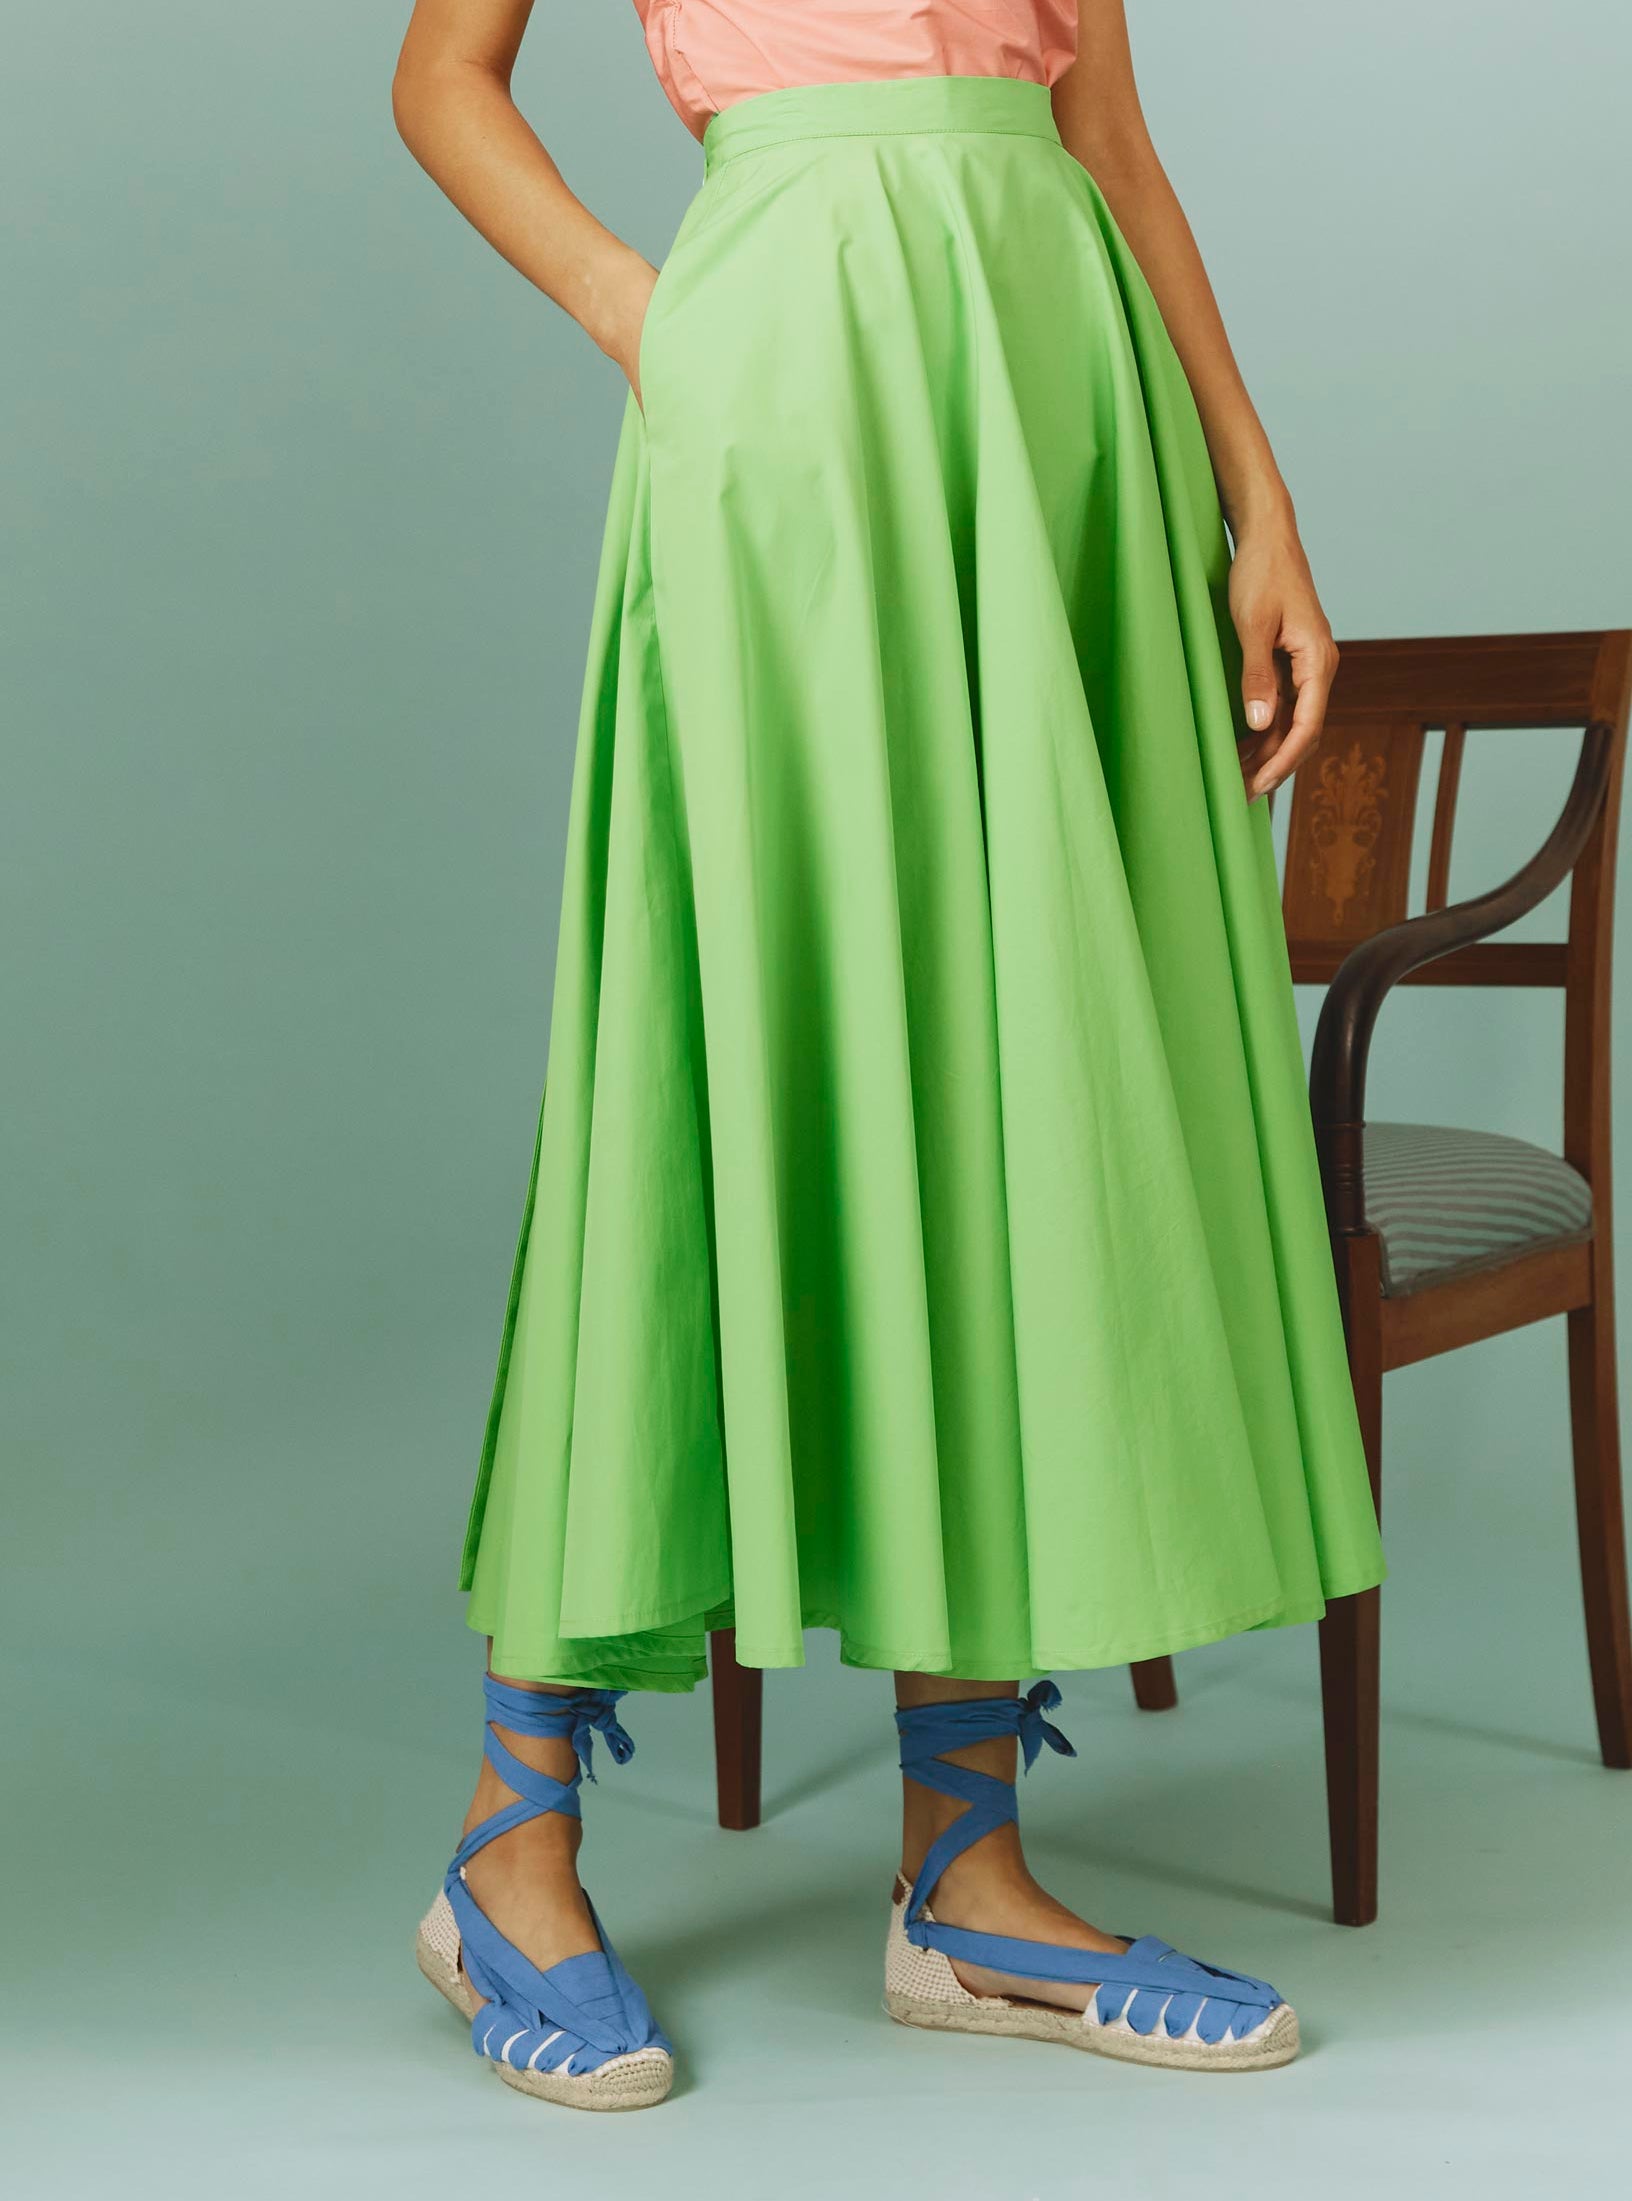 Close-up of Audrey Skirt: Matisse Plain Poplin in Green by Thierry Colson